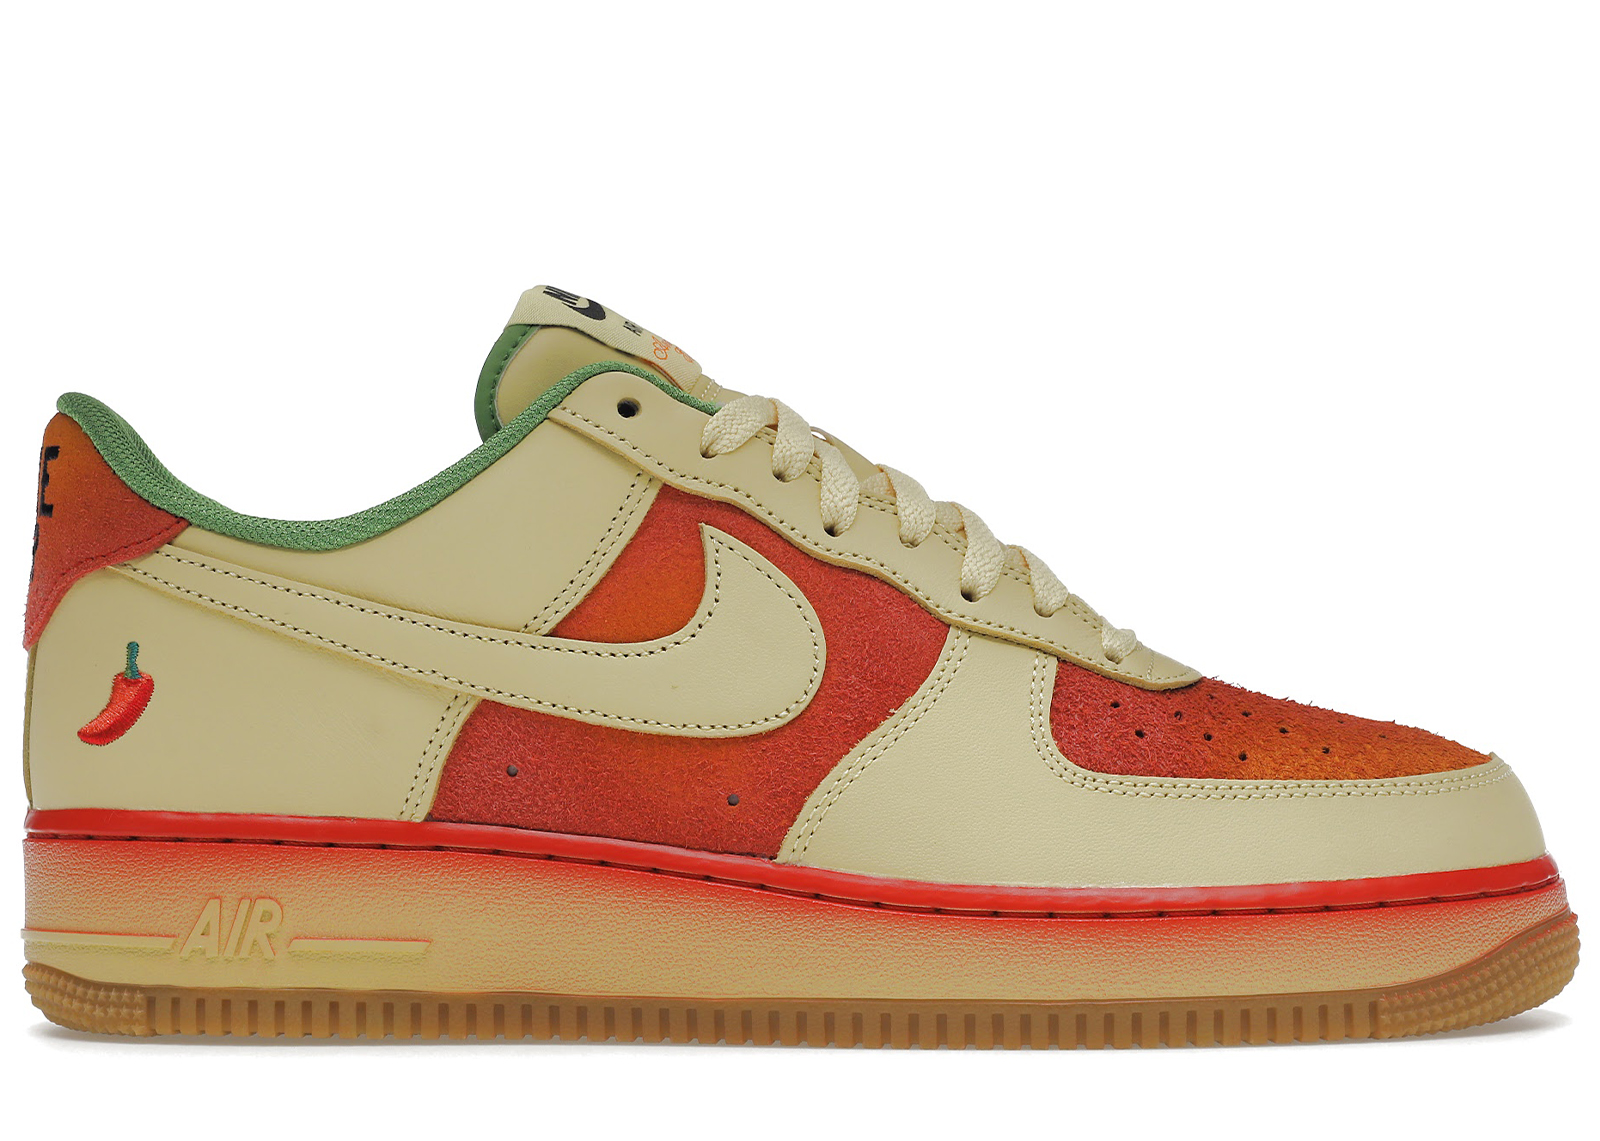 Nike Air Force 1 Low '07 Chili Pepper Men's - DZ4493-700 - US